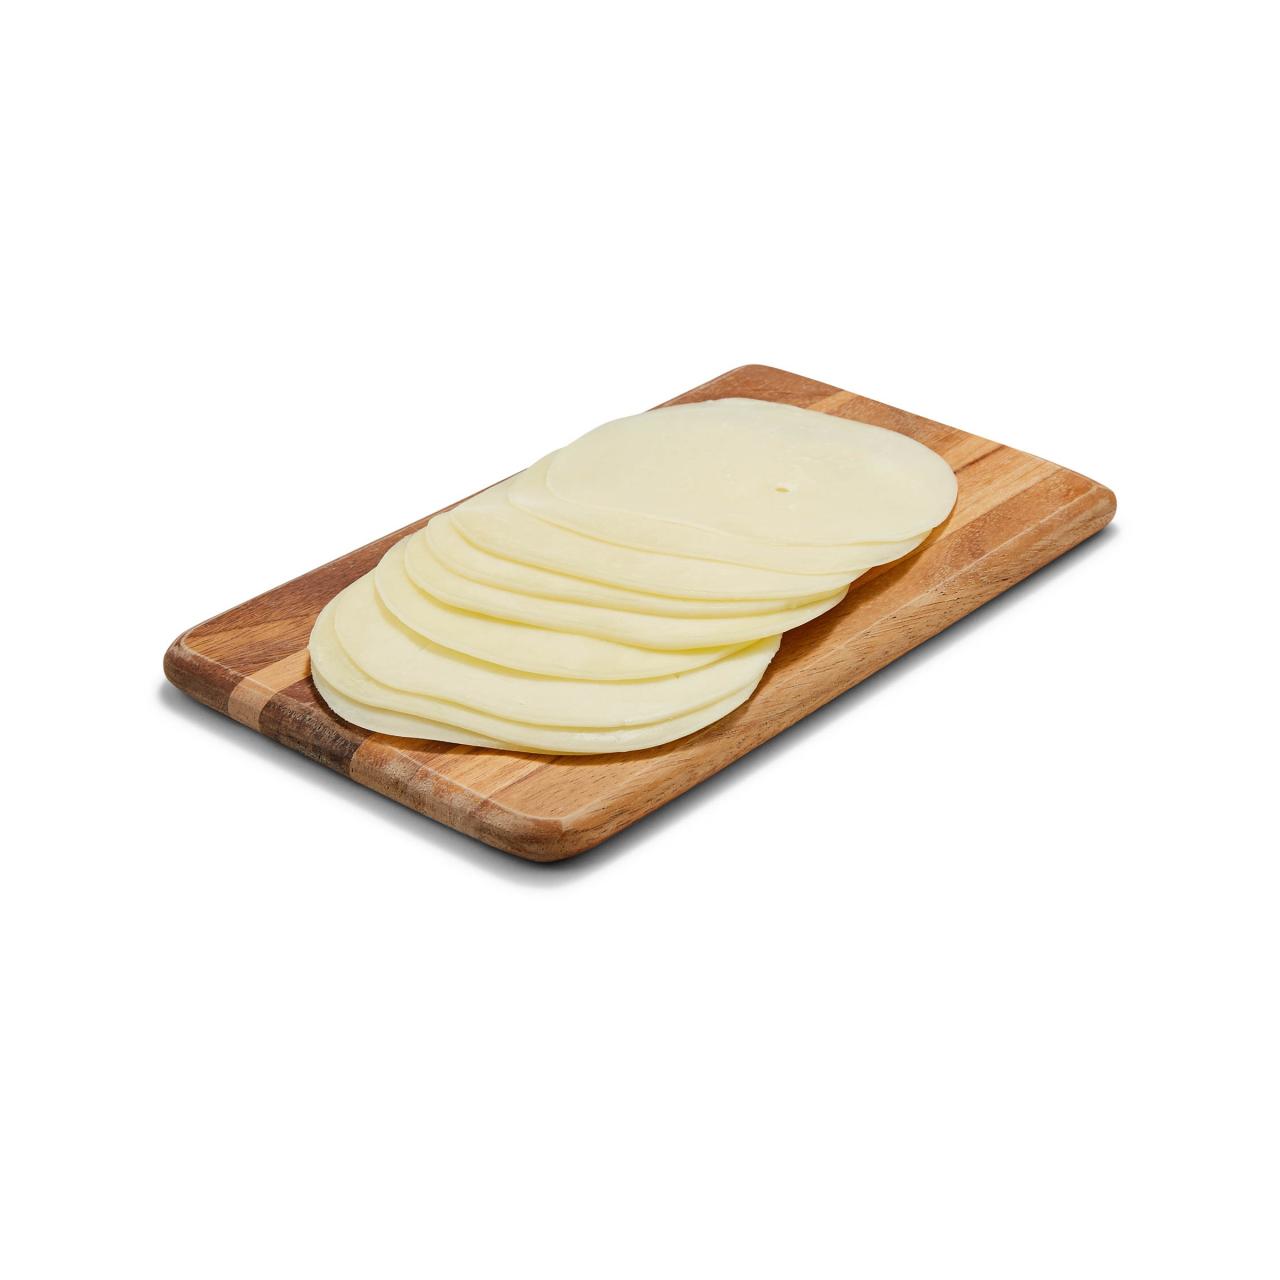 Provolone Cheese at Whole Foods Market